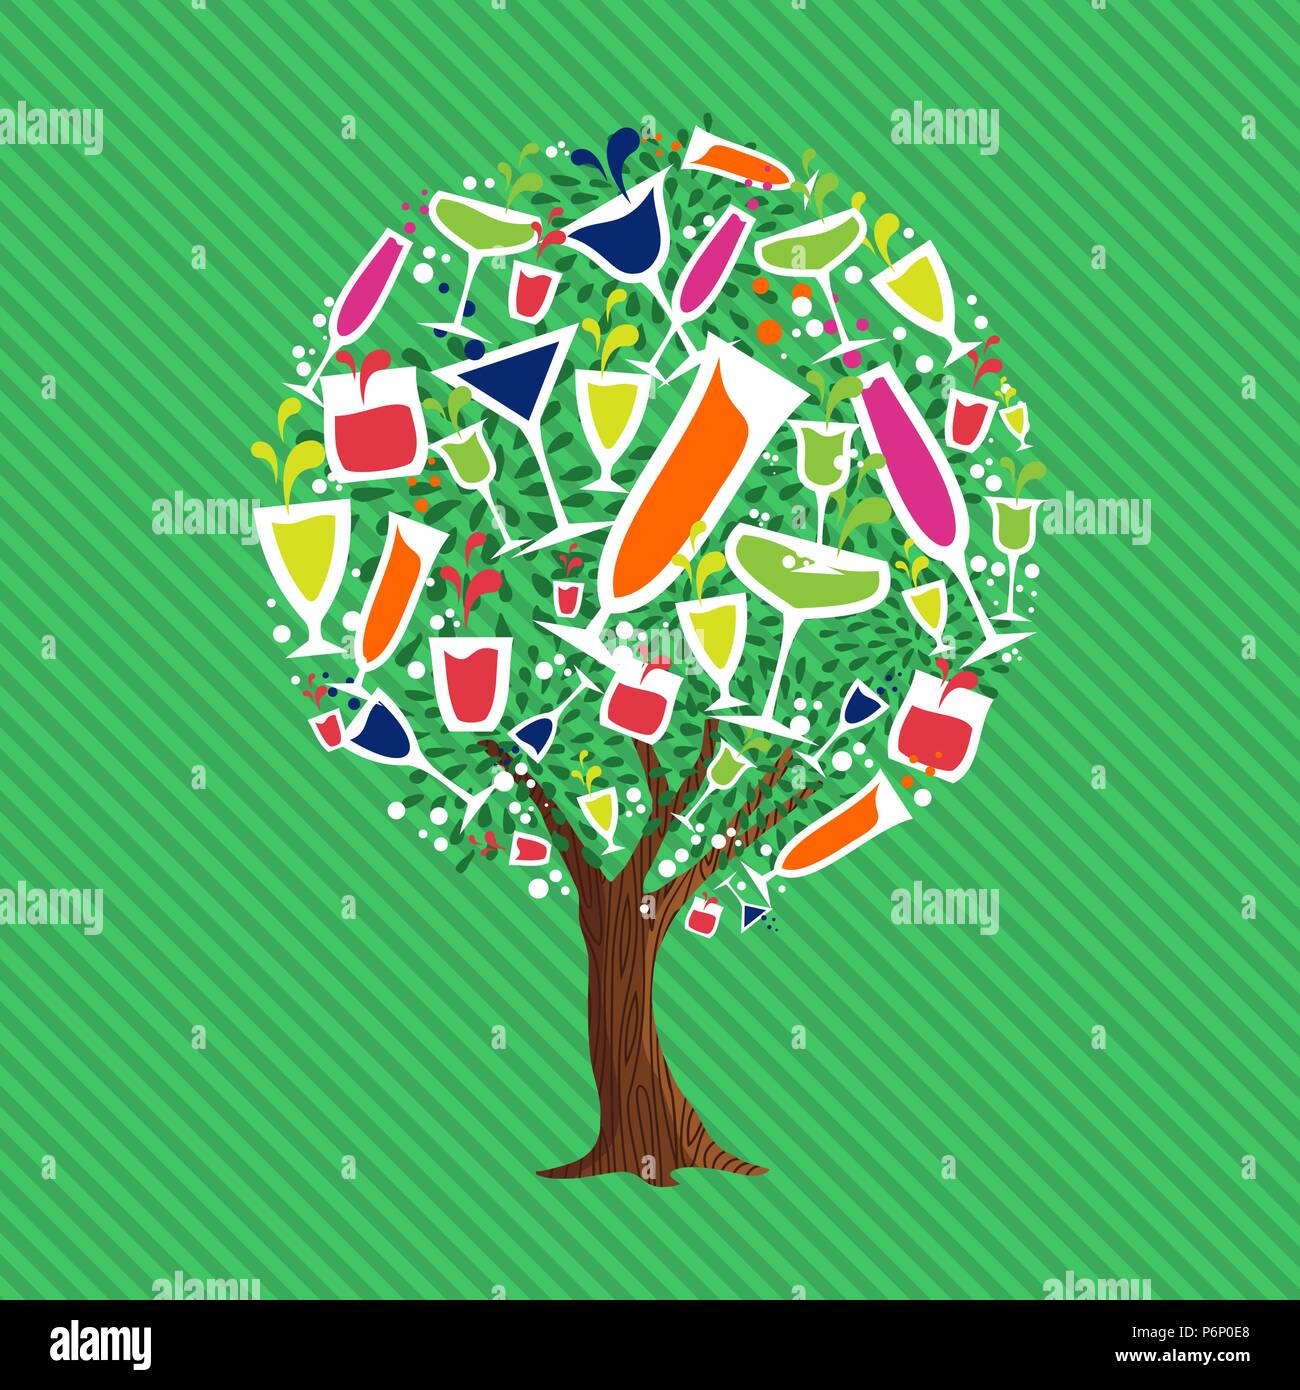 Tree made of colorful drinking glasses. Fruit juice concept, fun summer party drink illustration. EPS10 vector. Stock Vector